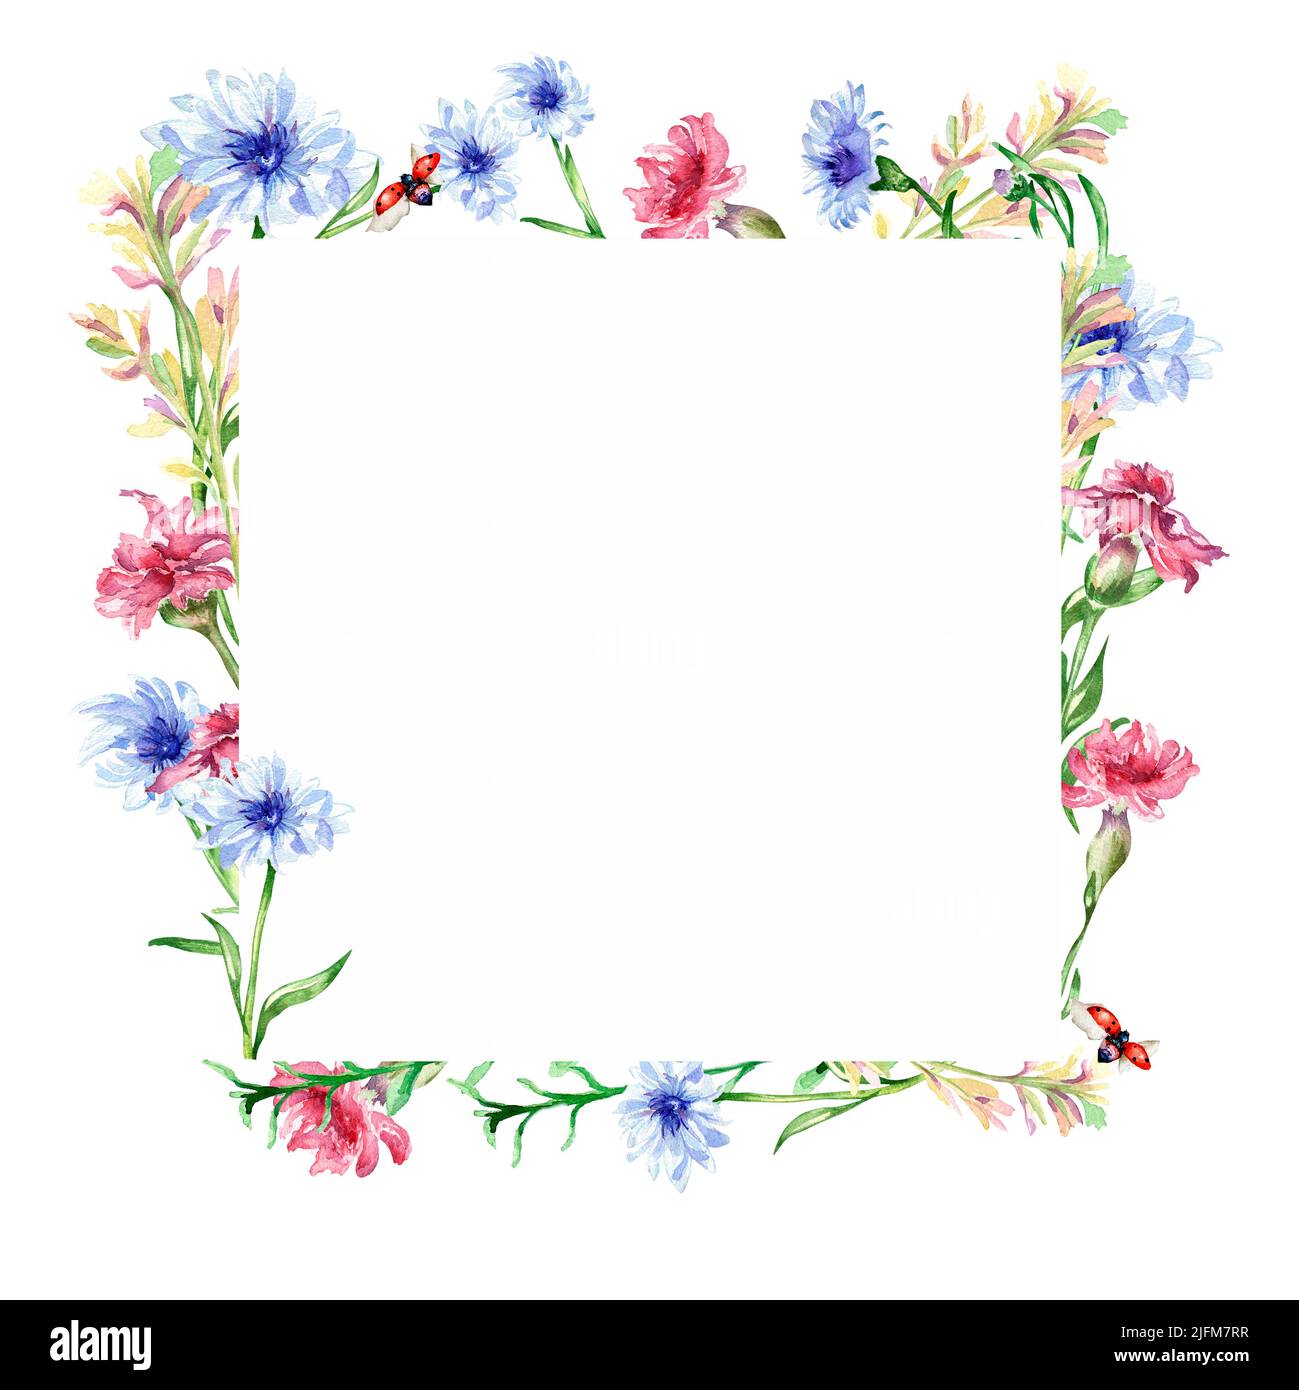 Frame with meadow colorful flowers watercolor illustration isolated. Wildflowers, blue cornflower, ladybug hand painted. Grassland design elements for Stock Photo